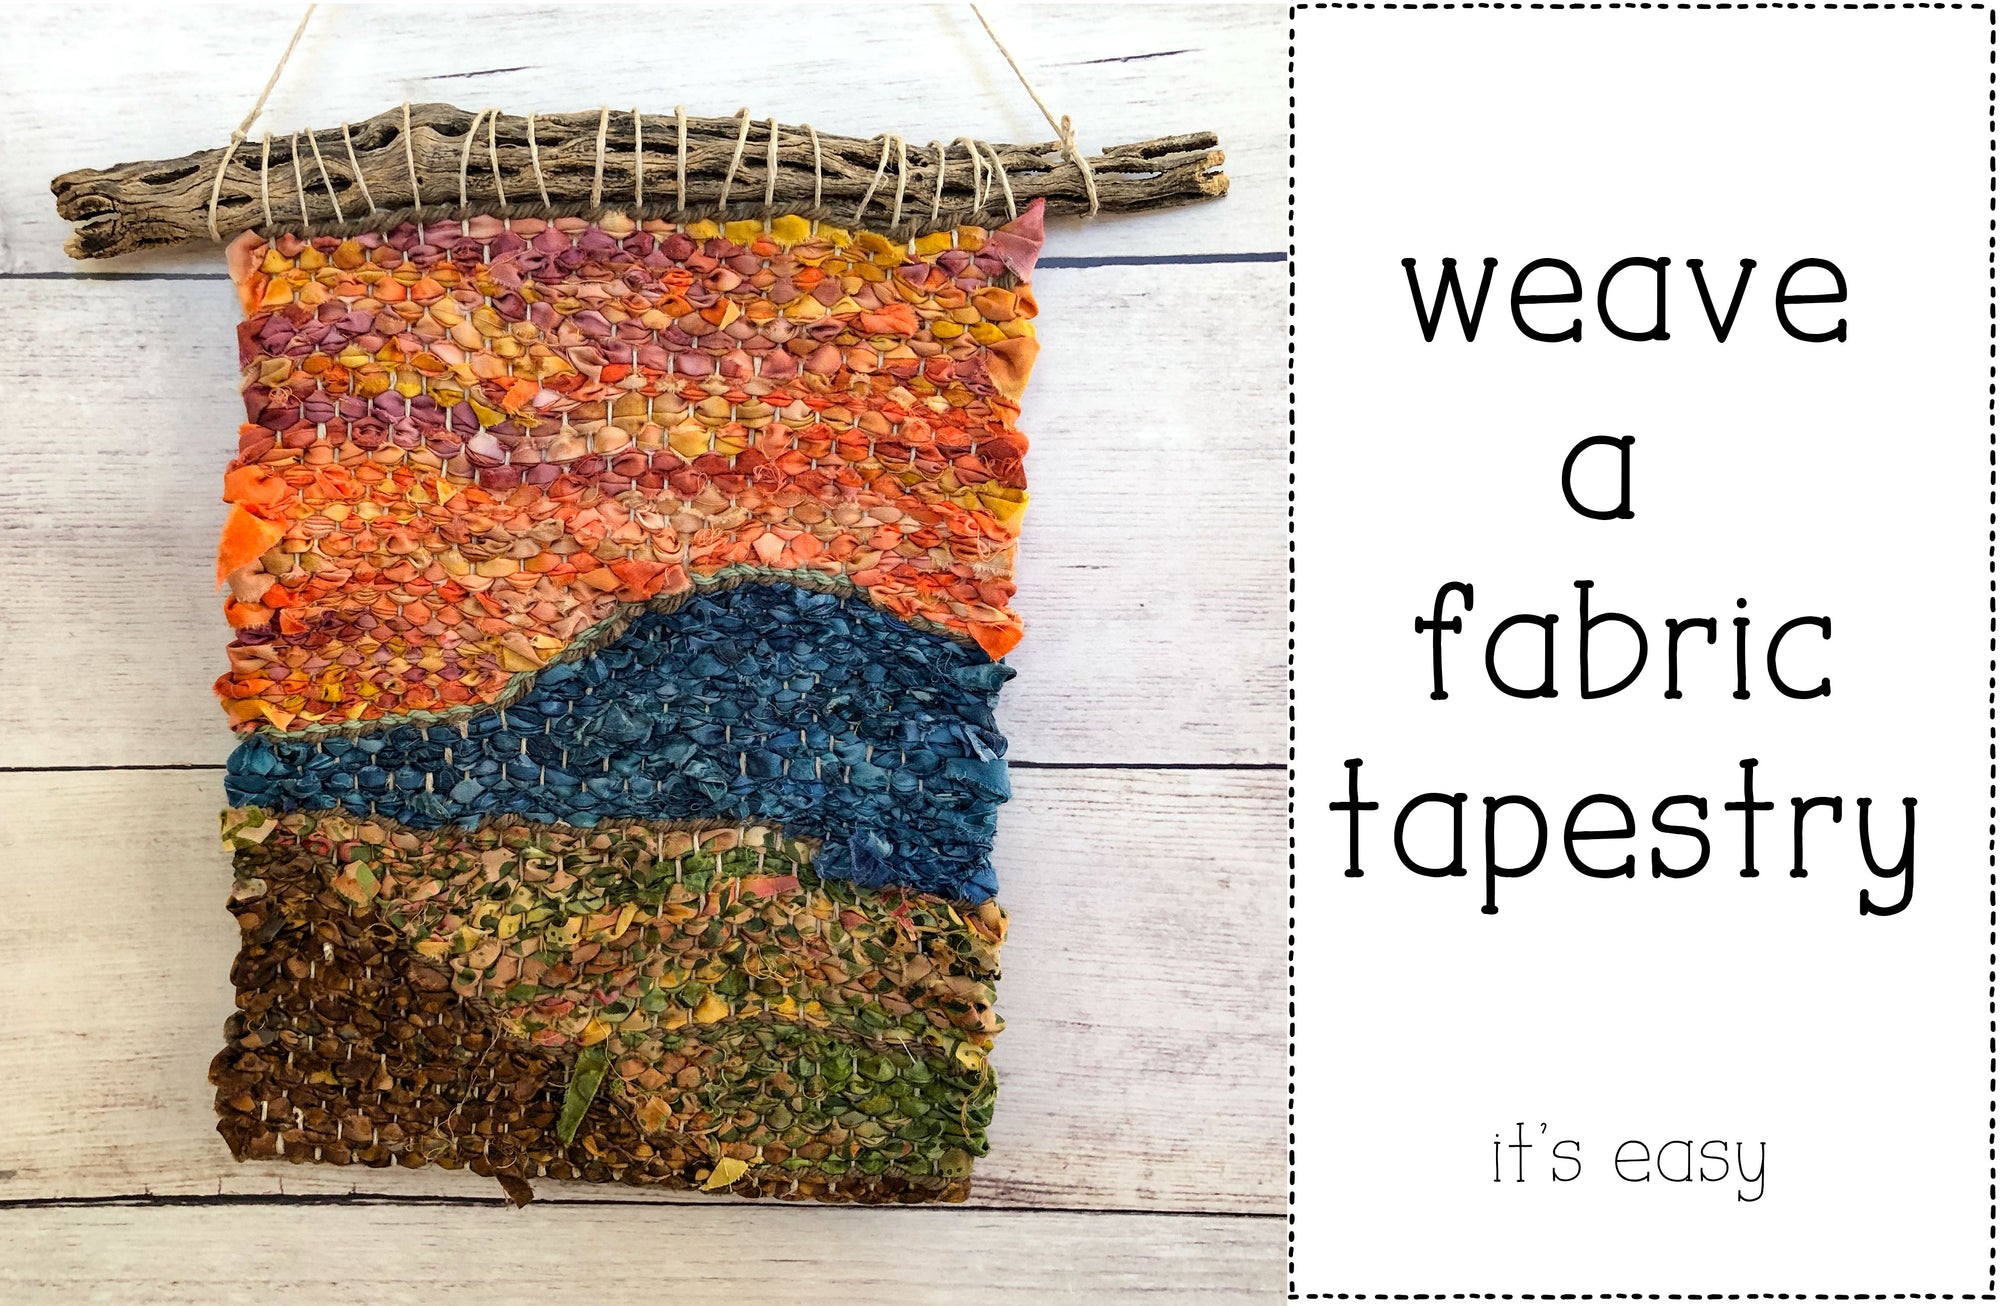 Tapestry Weaving with Fabric Strips